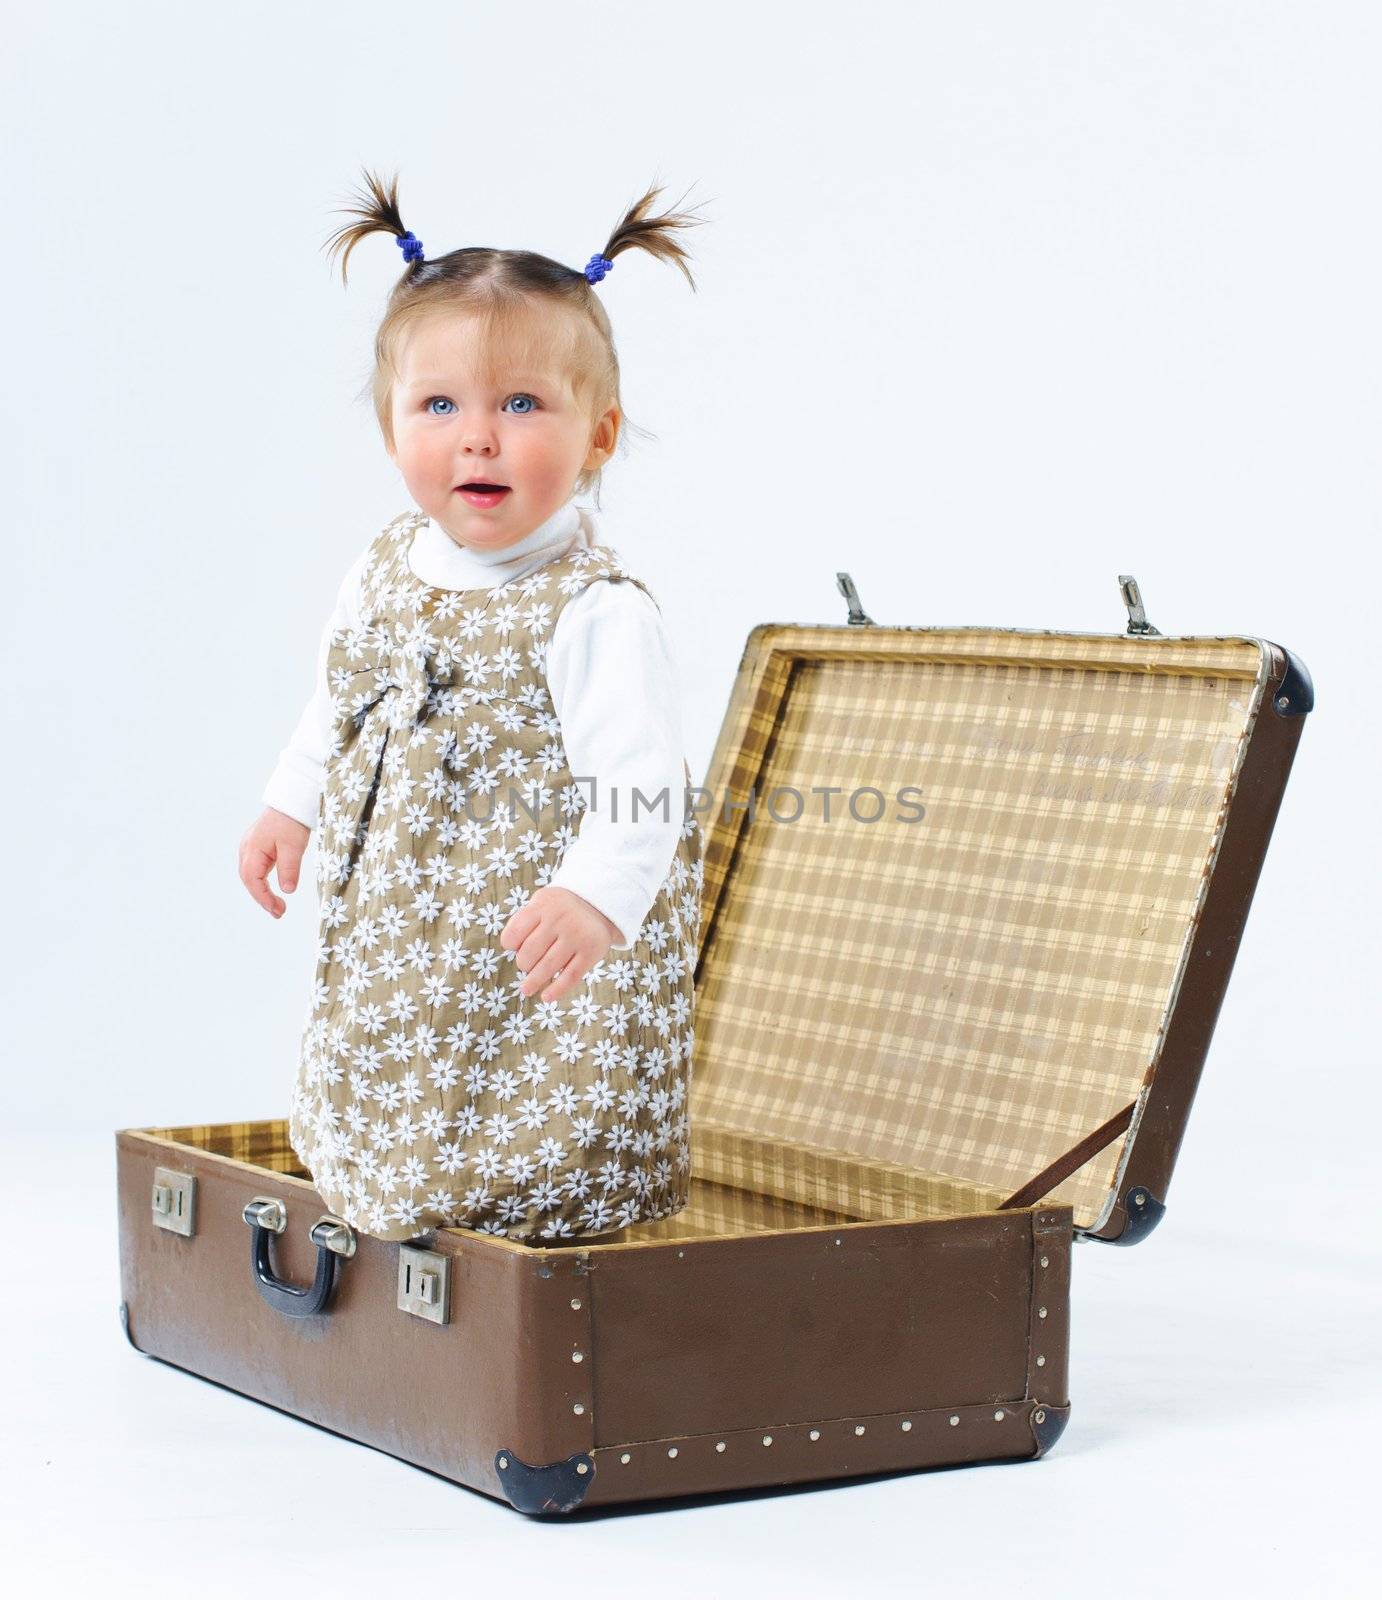 cute baby girl in nude stylish outfit and valise in studio